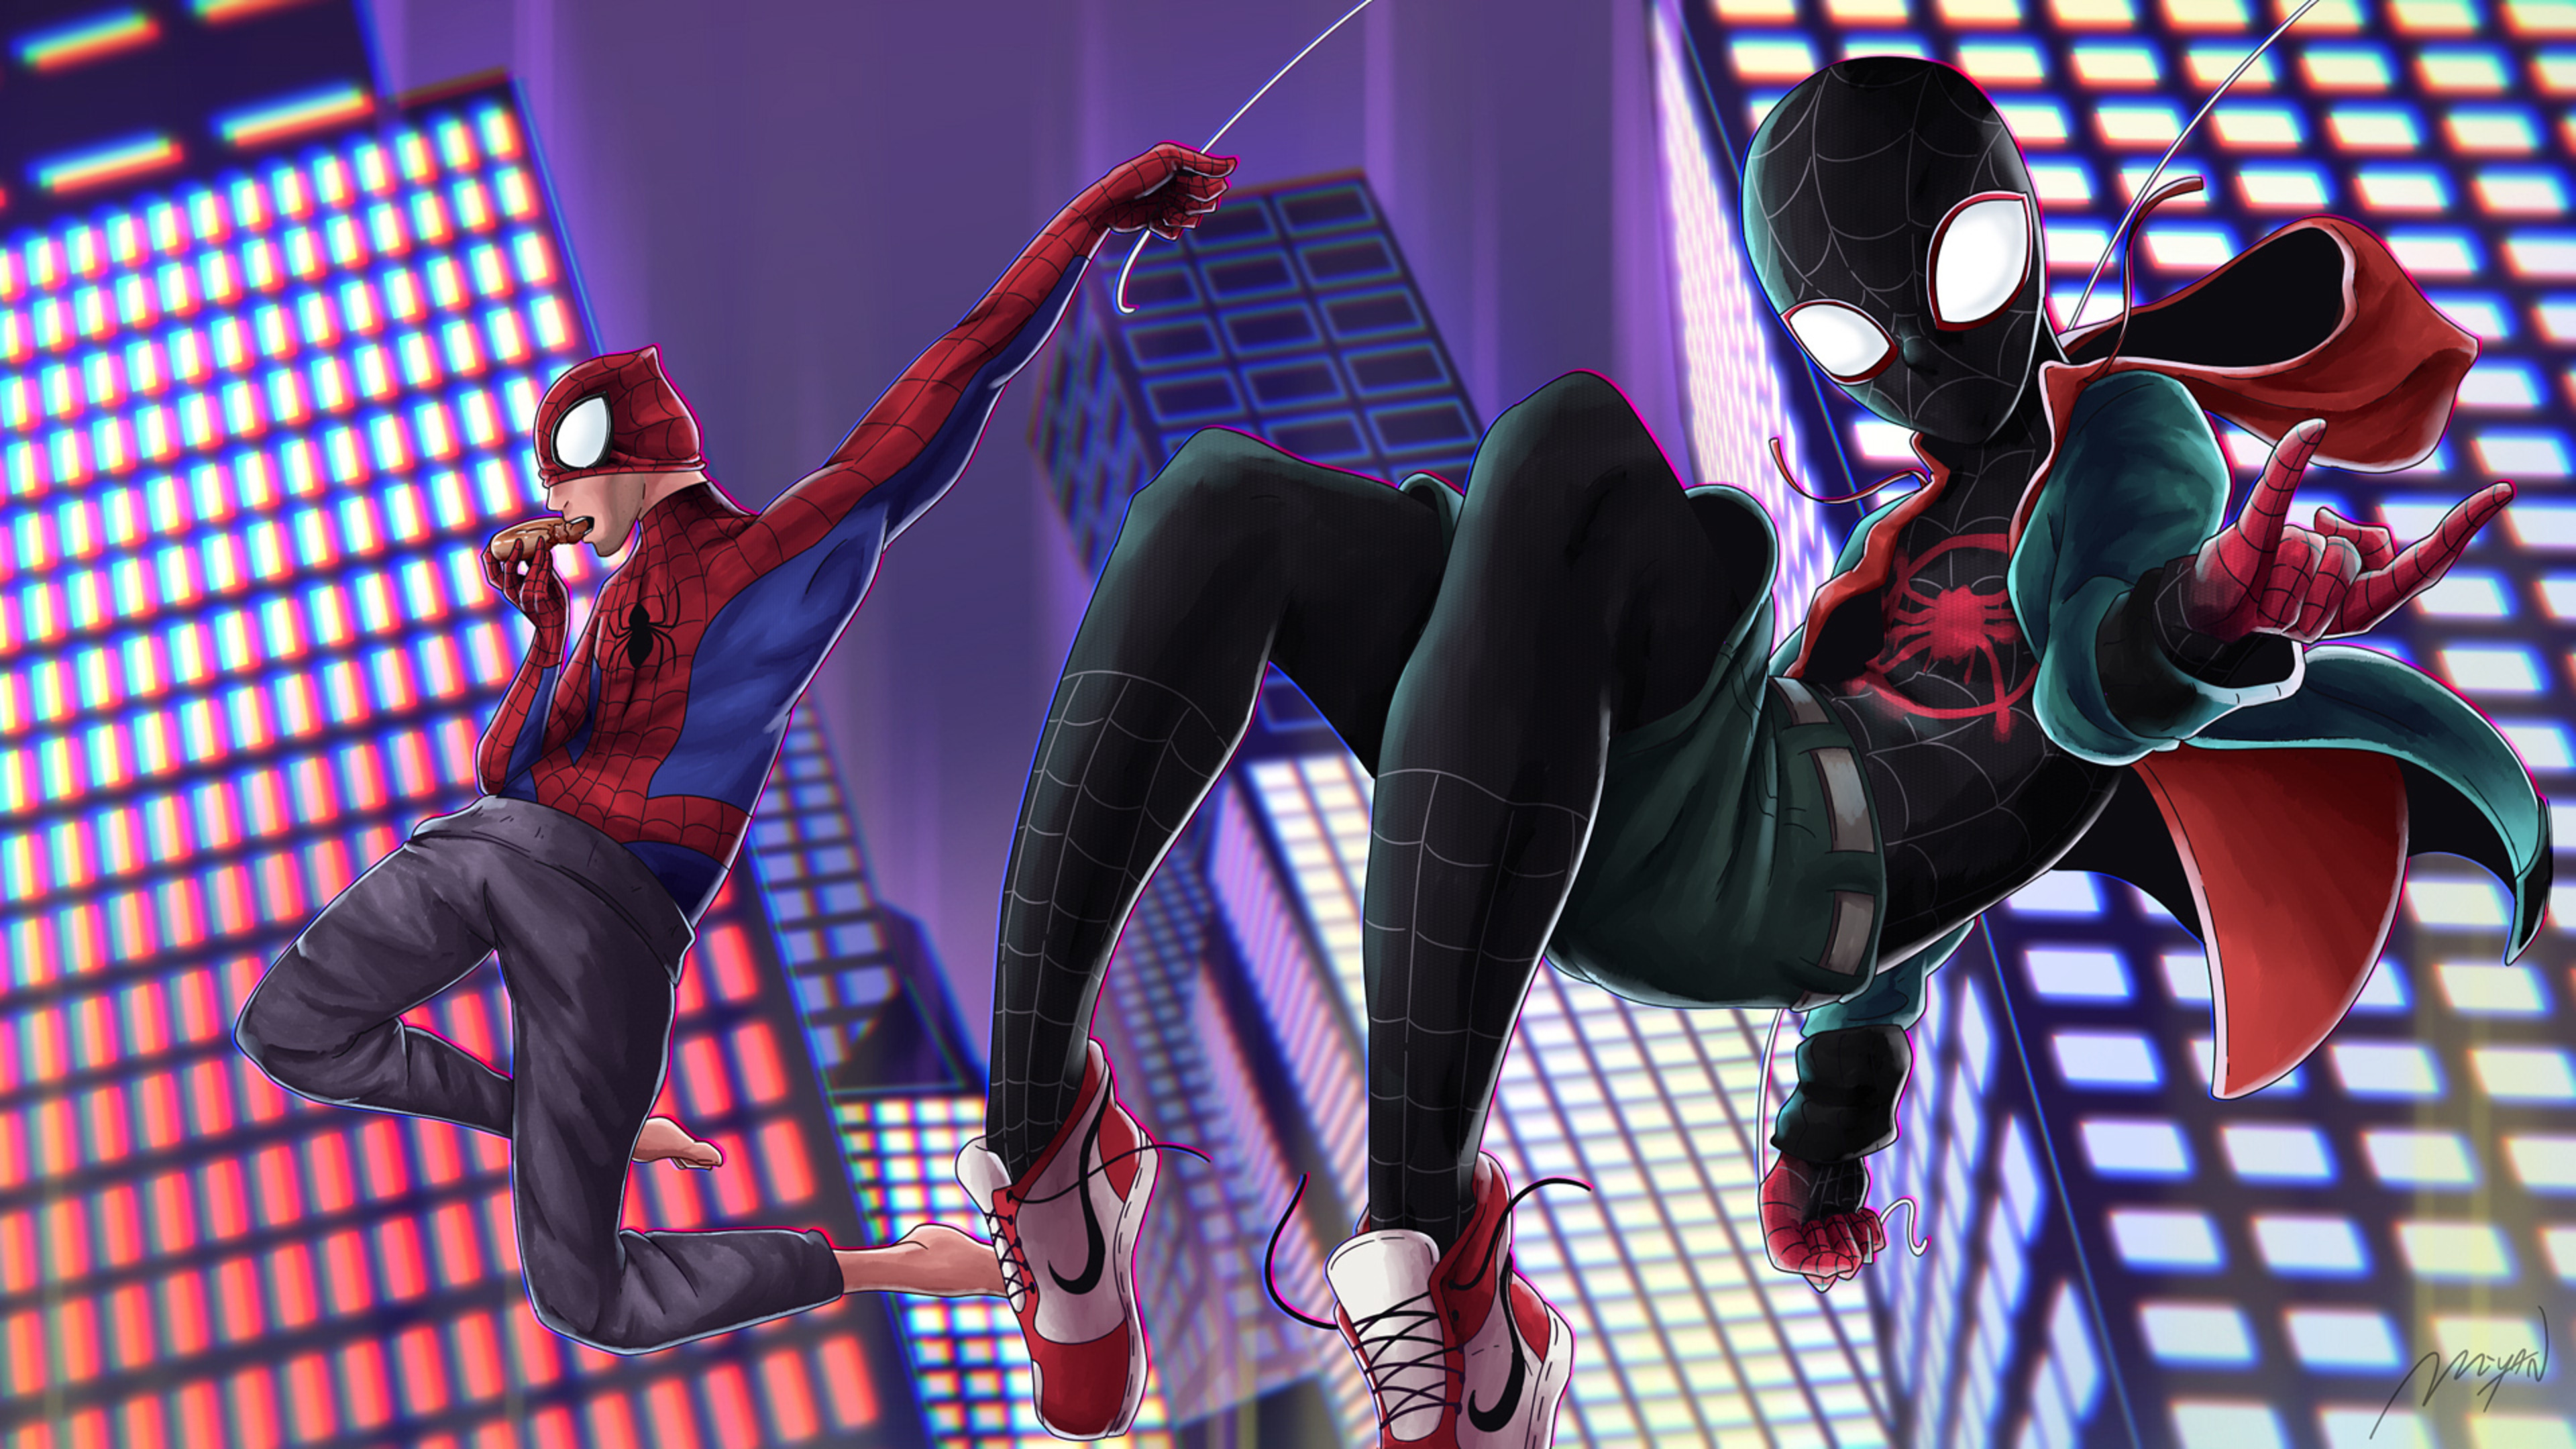 Into The SpiderVerse Art In 3840x2160 Resolution. into-the-spiderverse-art-...